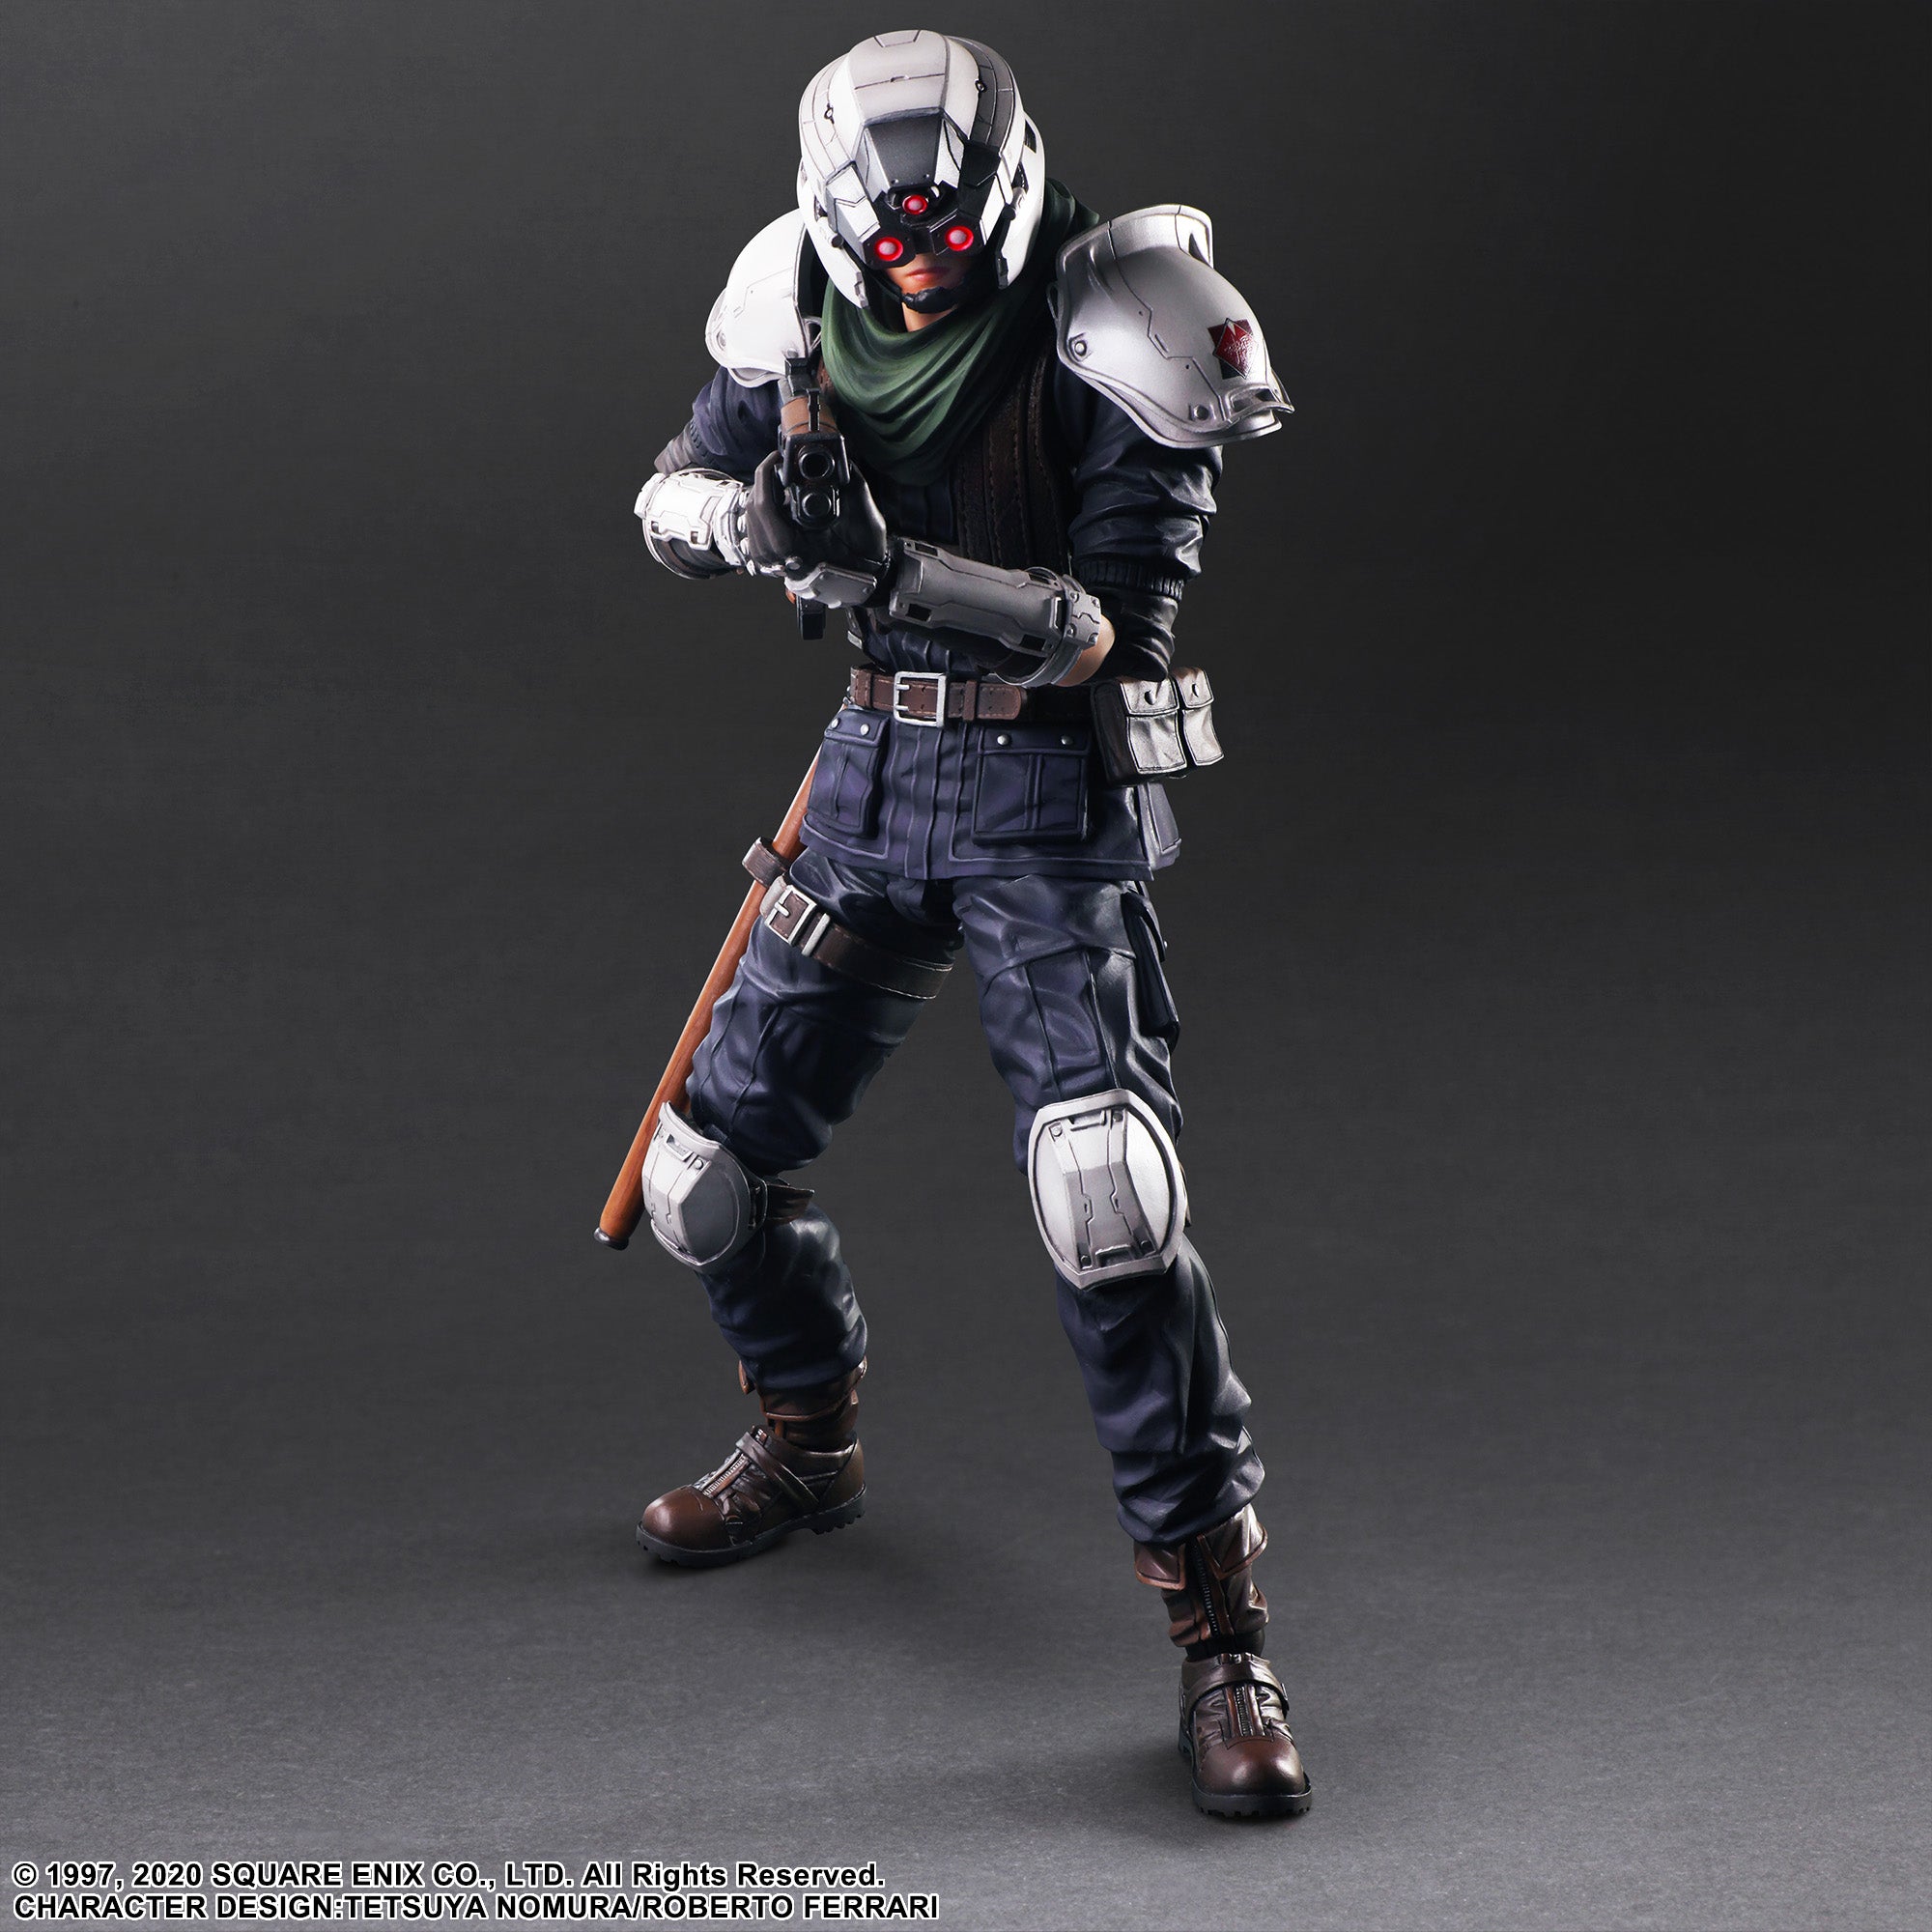 Square Enix Final Fantasy VII Remake Play Arts Kai Action Figure - Shinra Security Officer